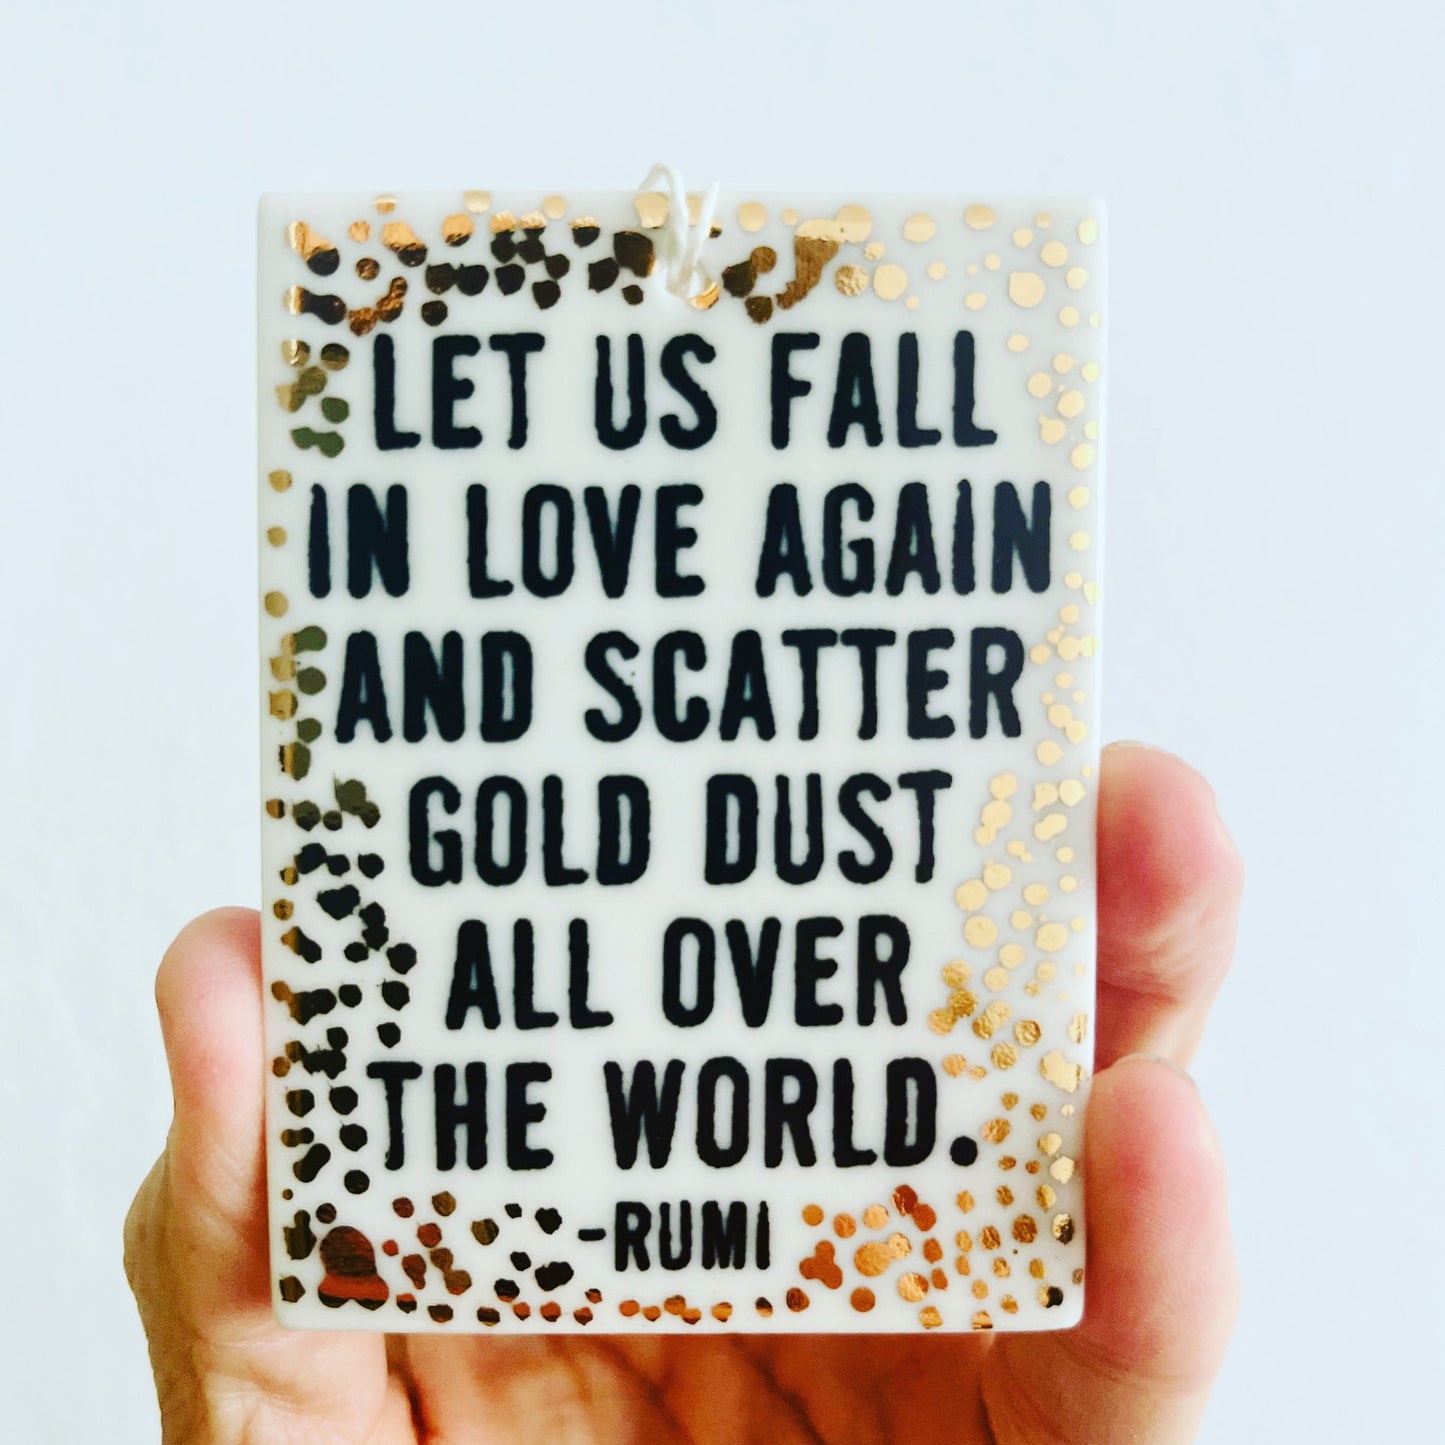 rumi quote | rumi wall hanging | rumi wall art | rumi poetry | hand painted | ceramic wall tag | inner peace | meditation | gold luster